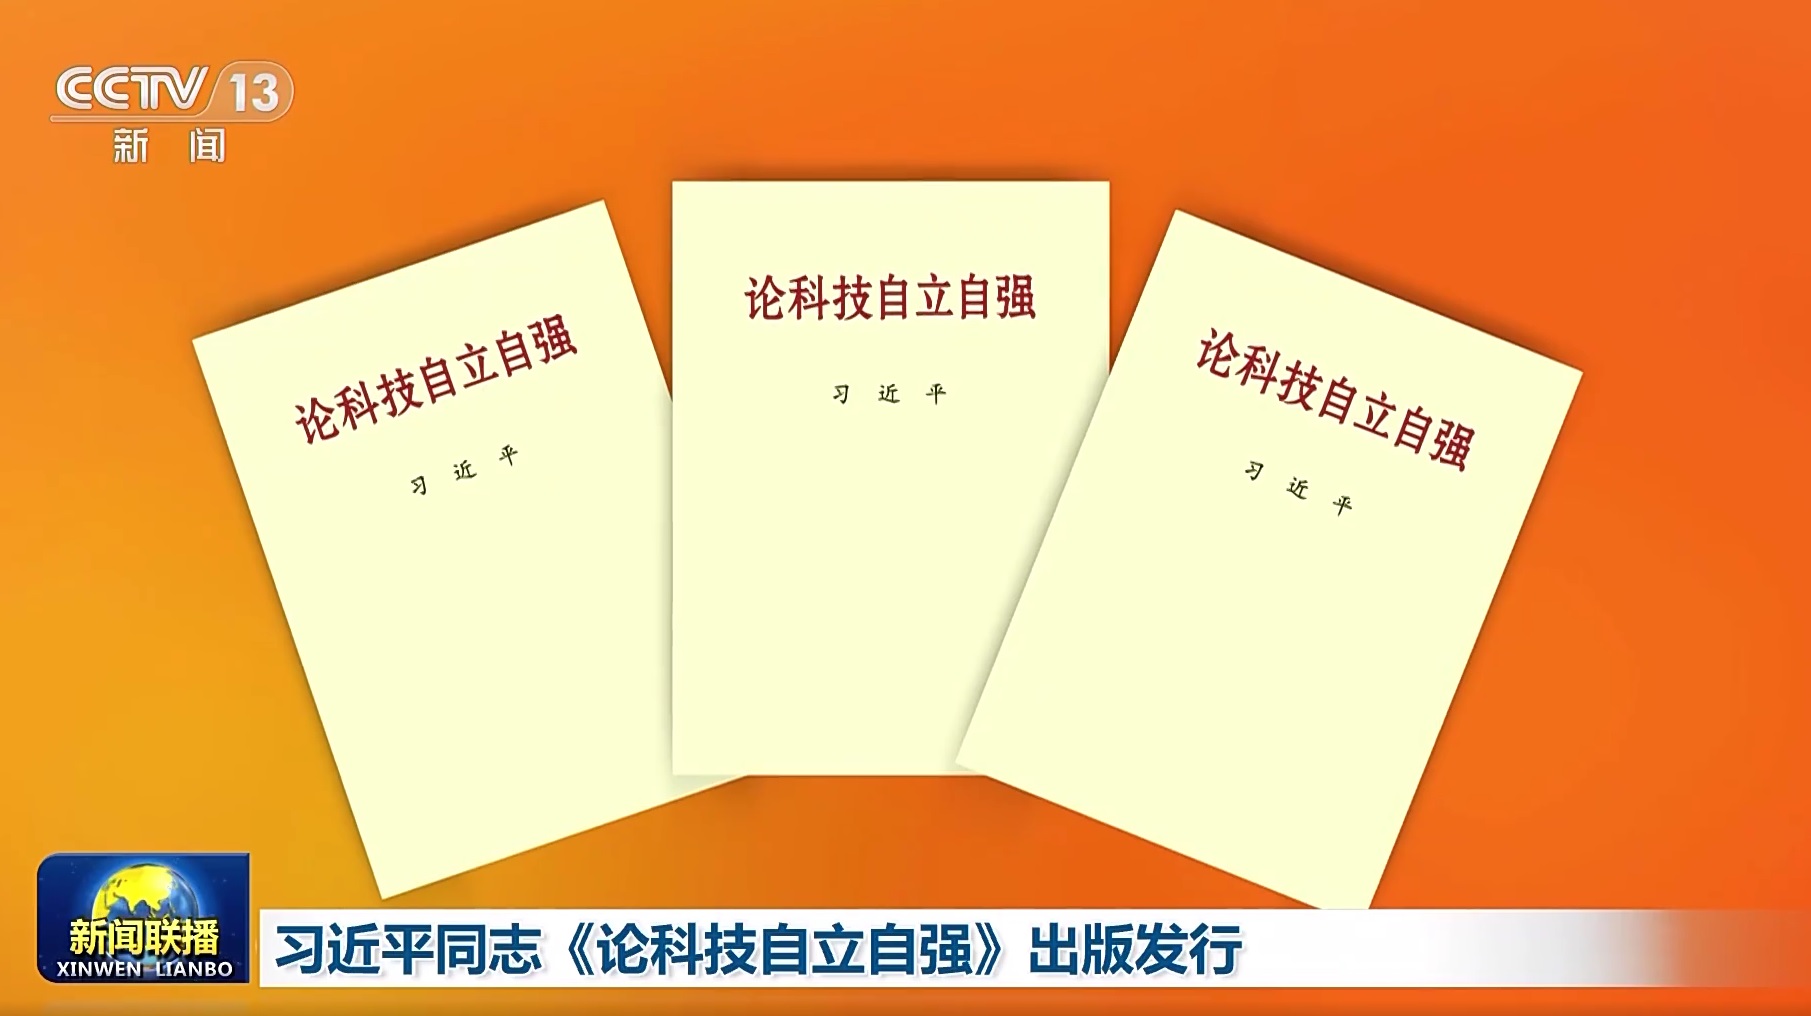 A collection of Xi Jinping’s articles on scientific and technological self-development